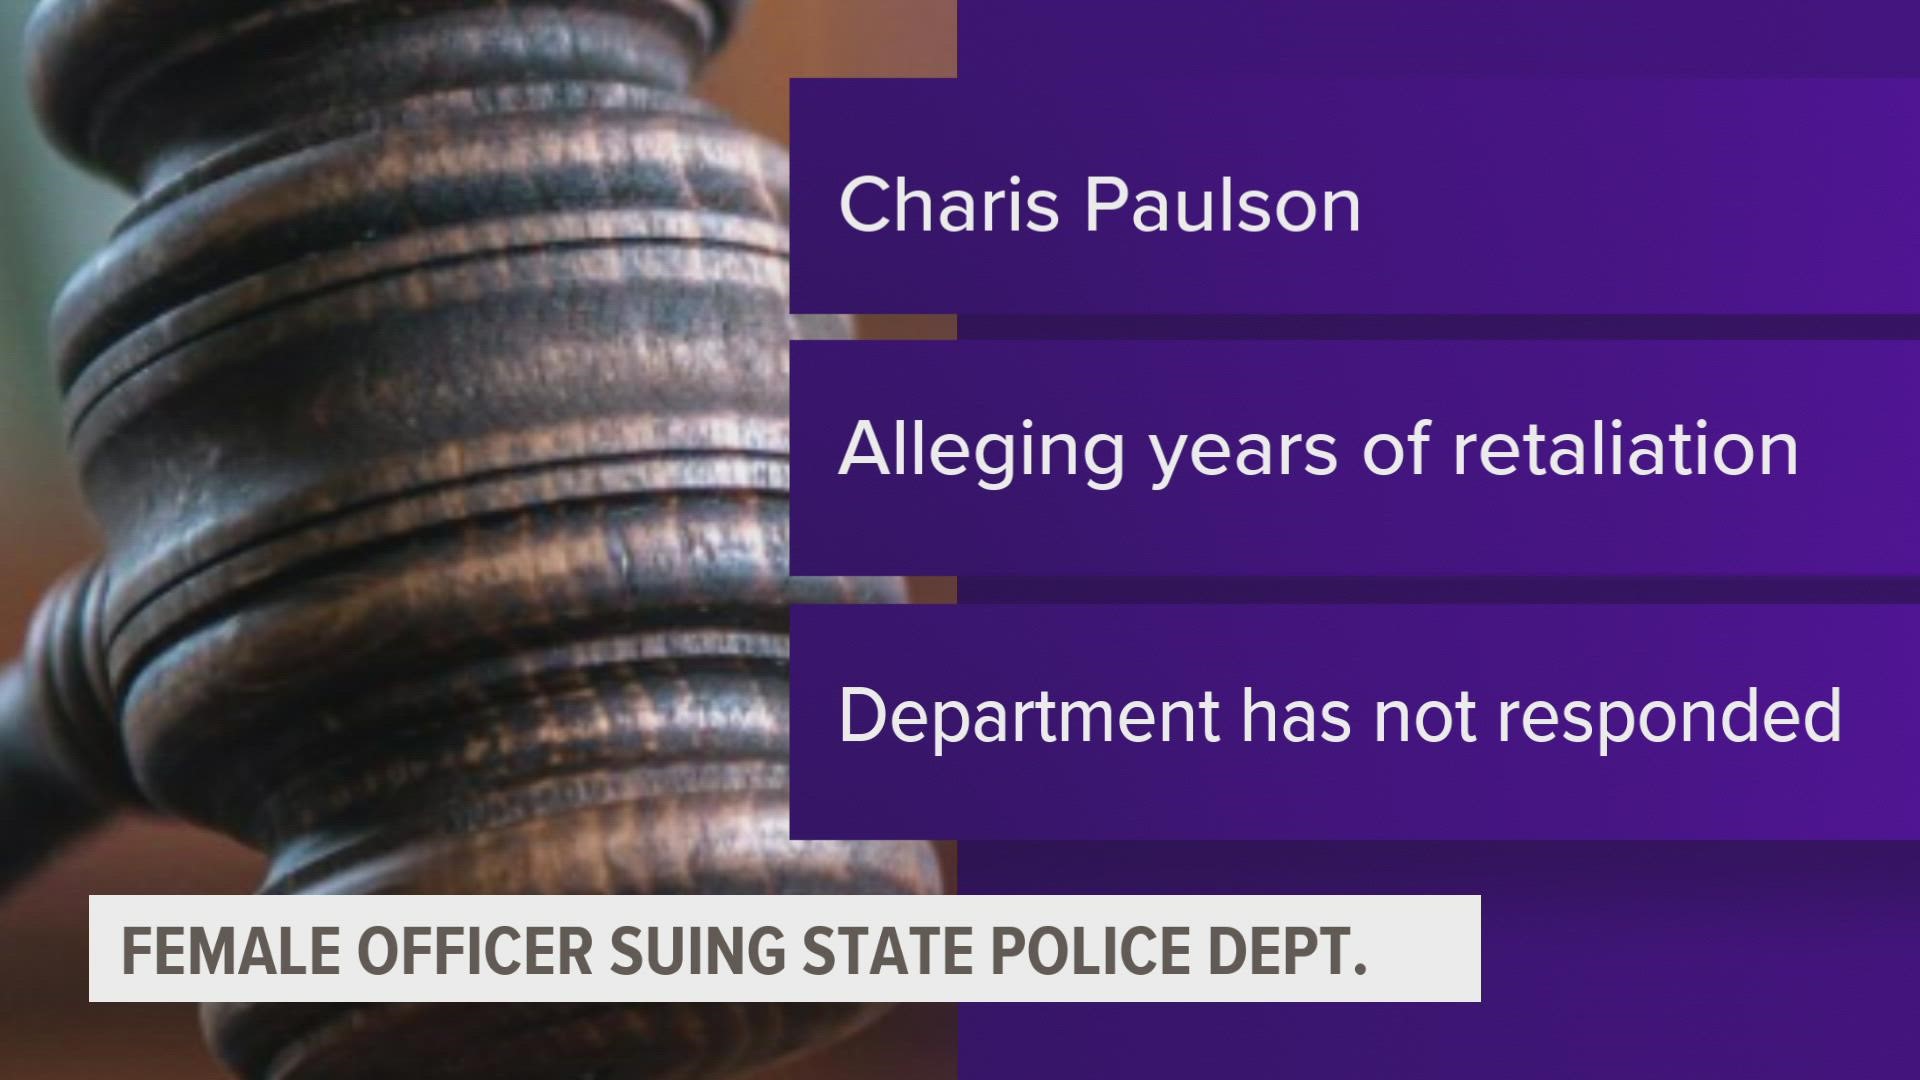 Charis Paulsen became the first woman to lead the Division of Criminal Investigation in 2012 and in recent years has served in department administrative roles.